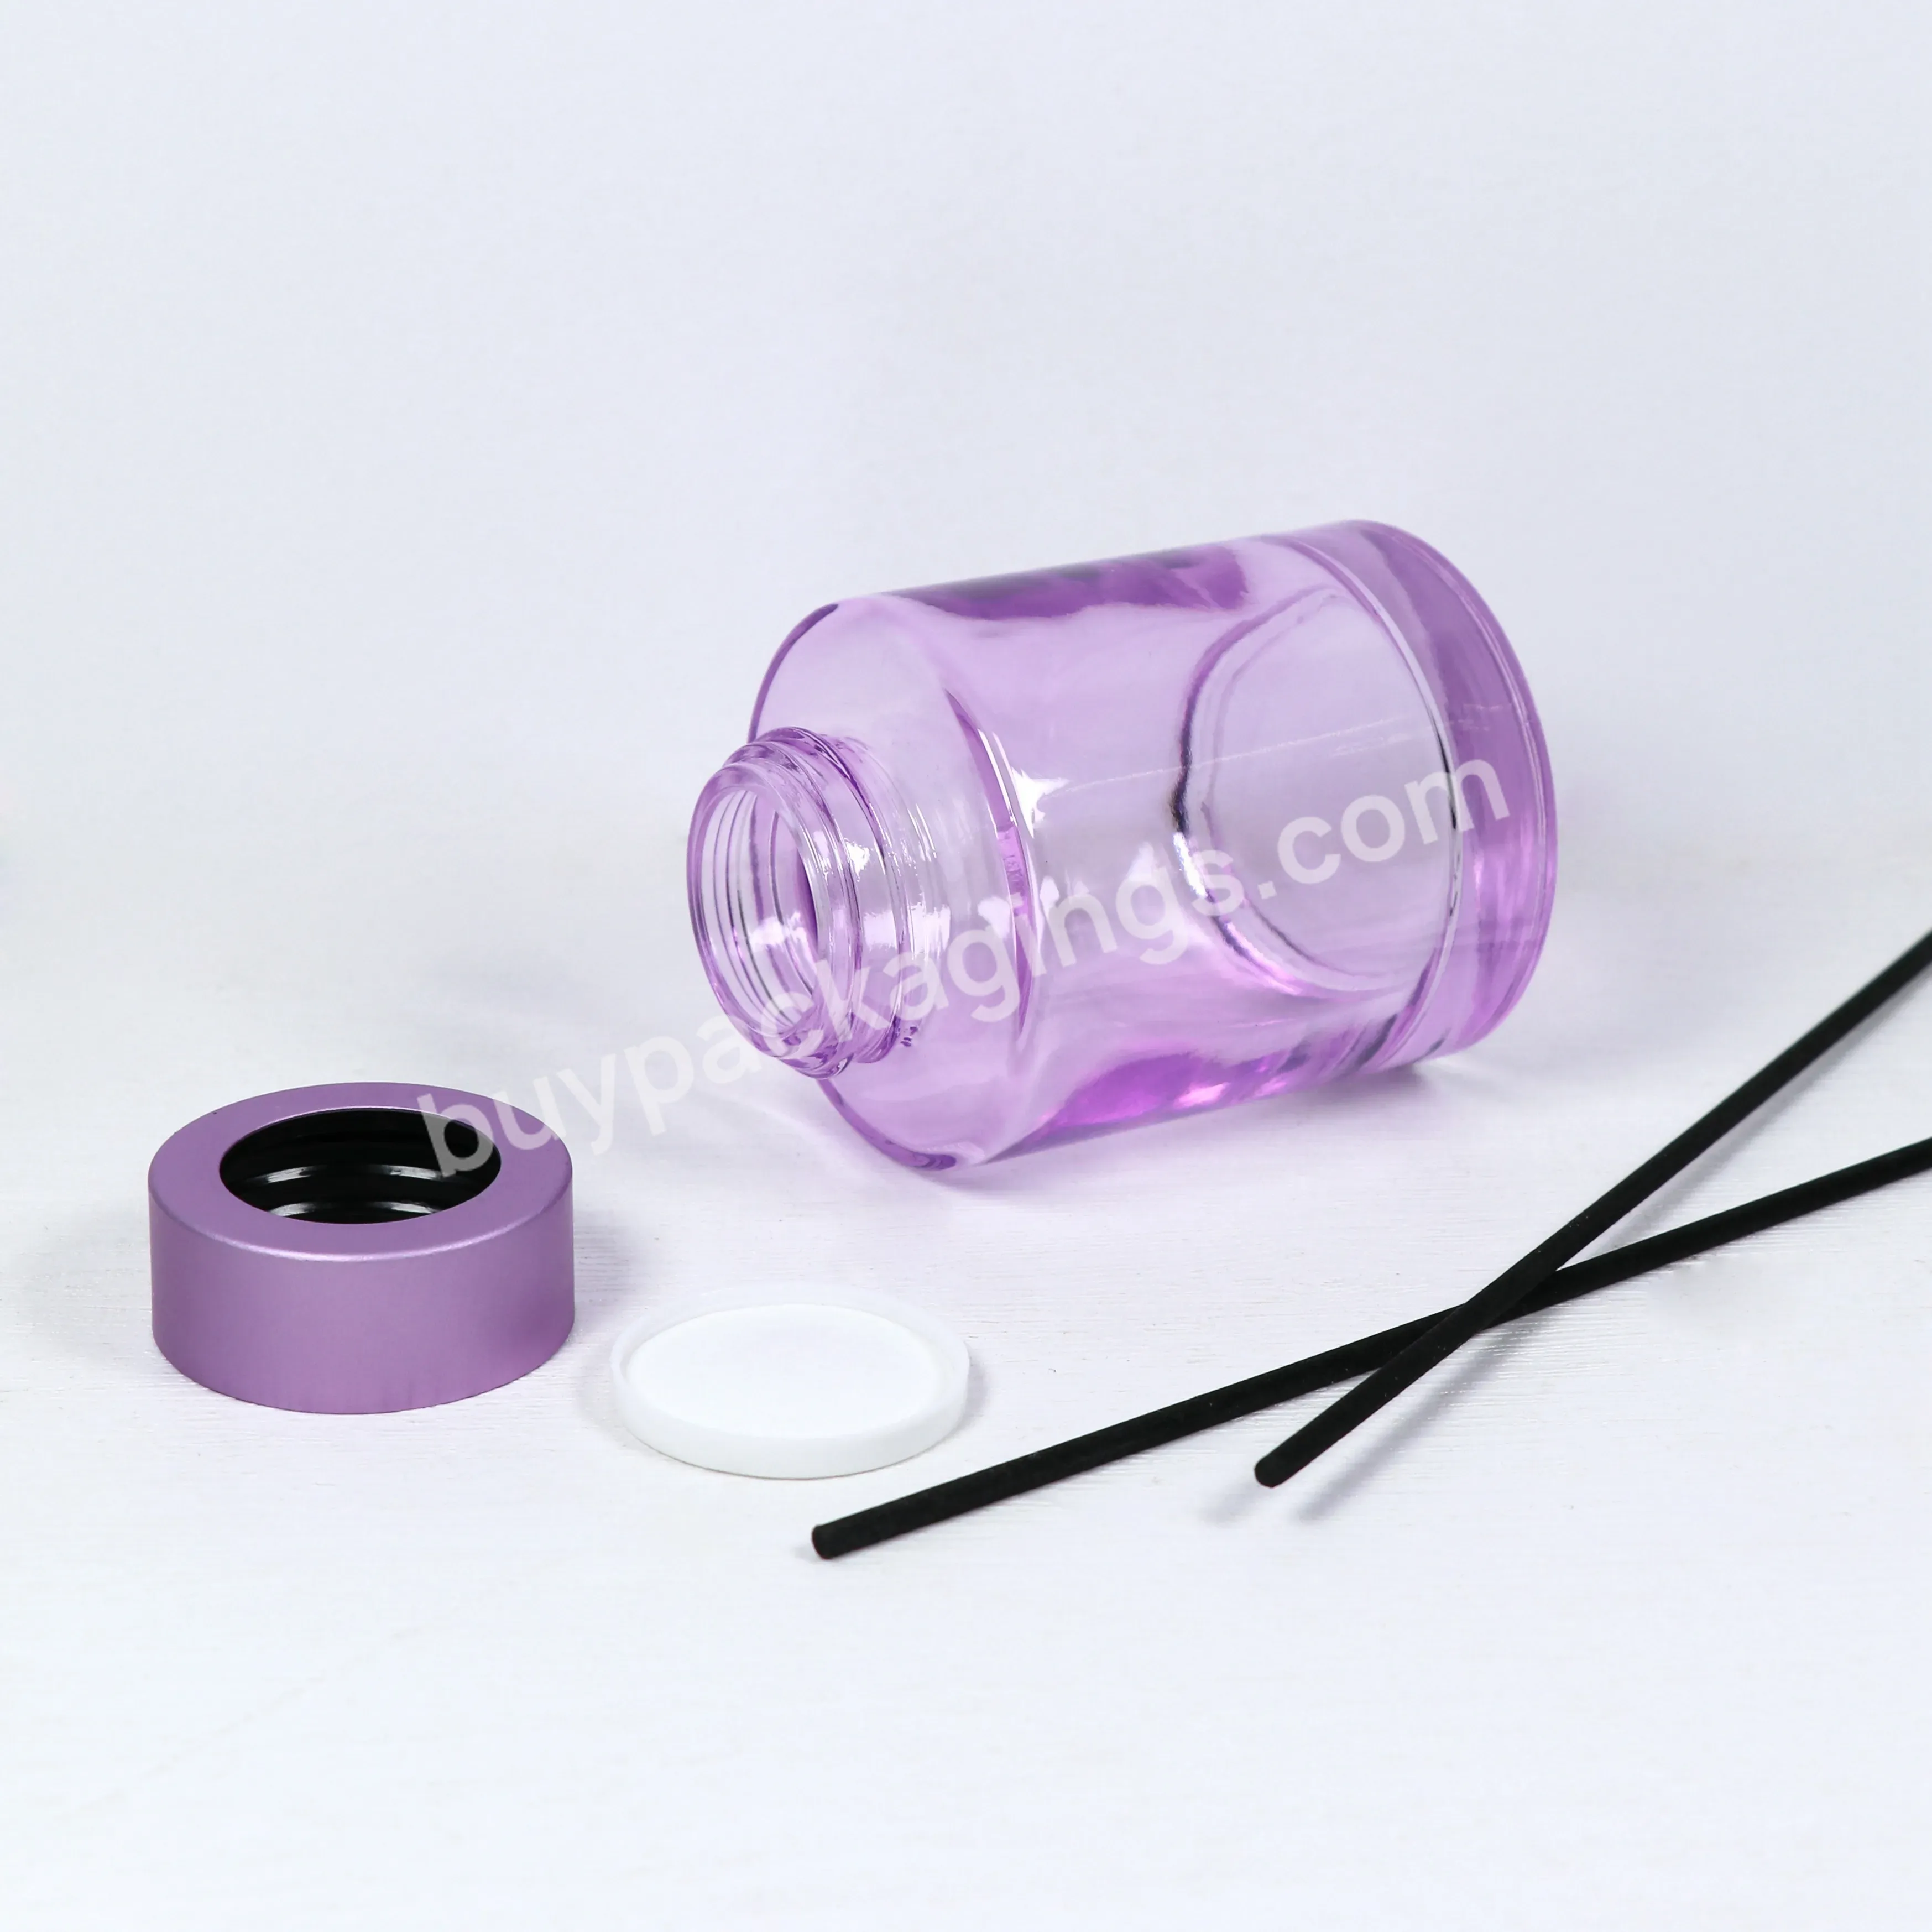 Empty Reed Diffuser Glass Bottle Round Shape 100ml Purple Glass Reed Diffuser Bottle With Cap - Buy Reed Diffuser Glass Bottle,Glass Reed Diffuser Bottle,Empty Reed Diffuser Glass Bottle.